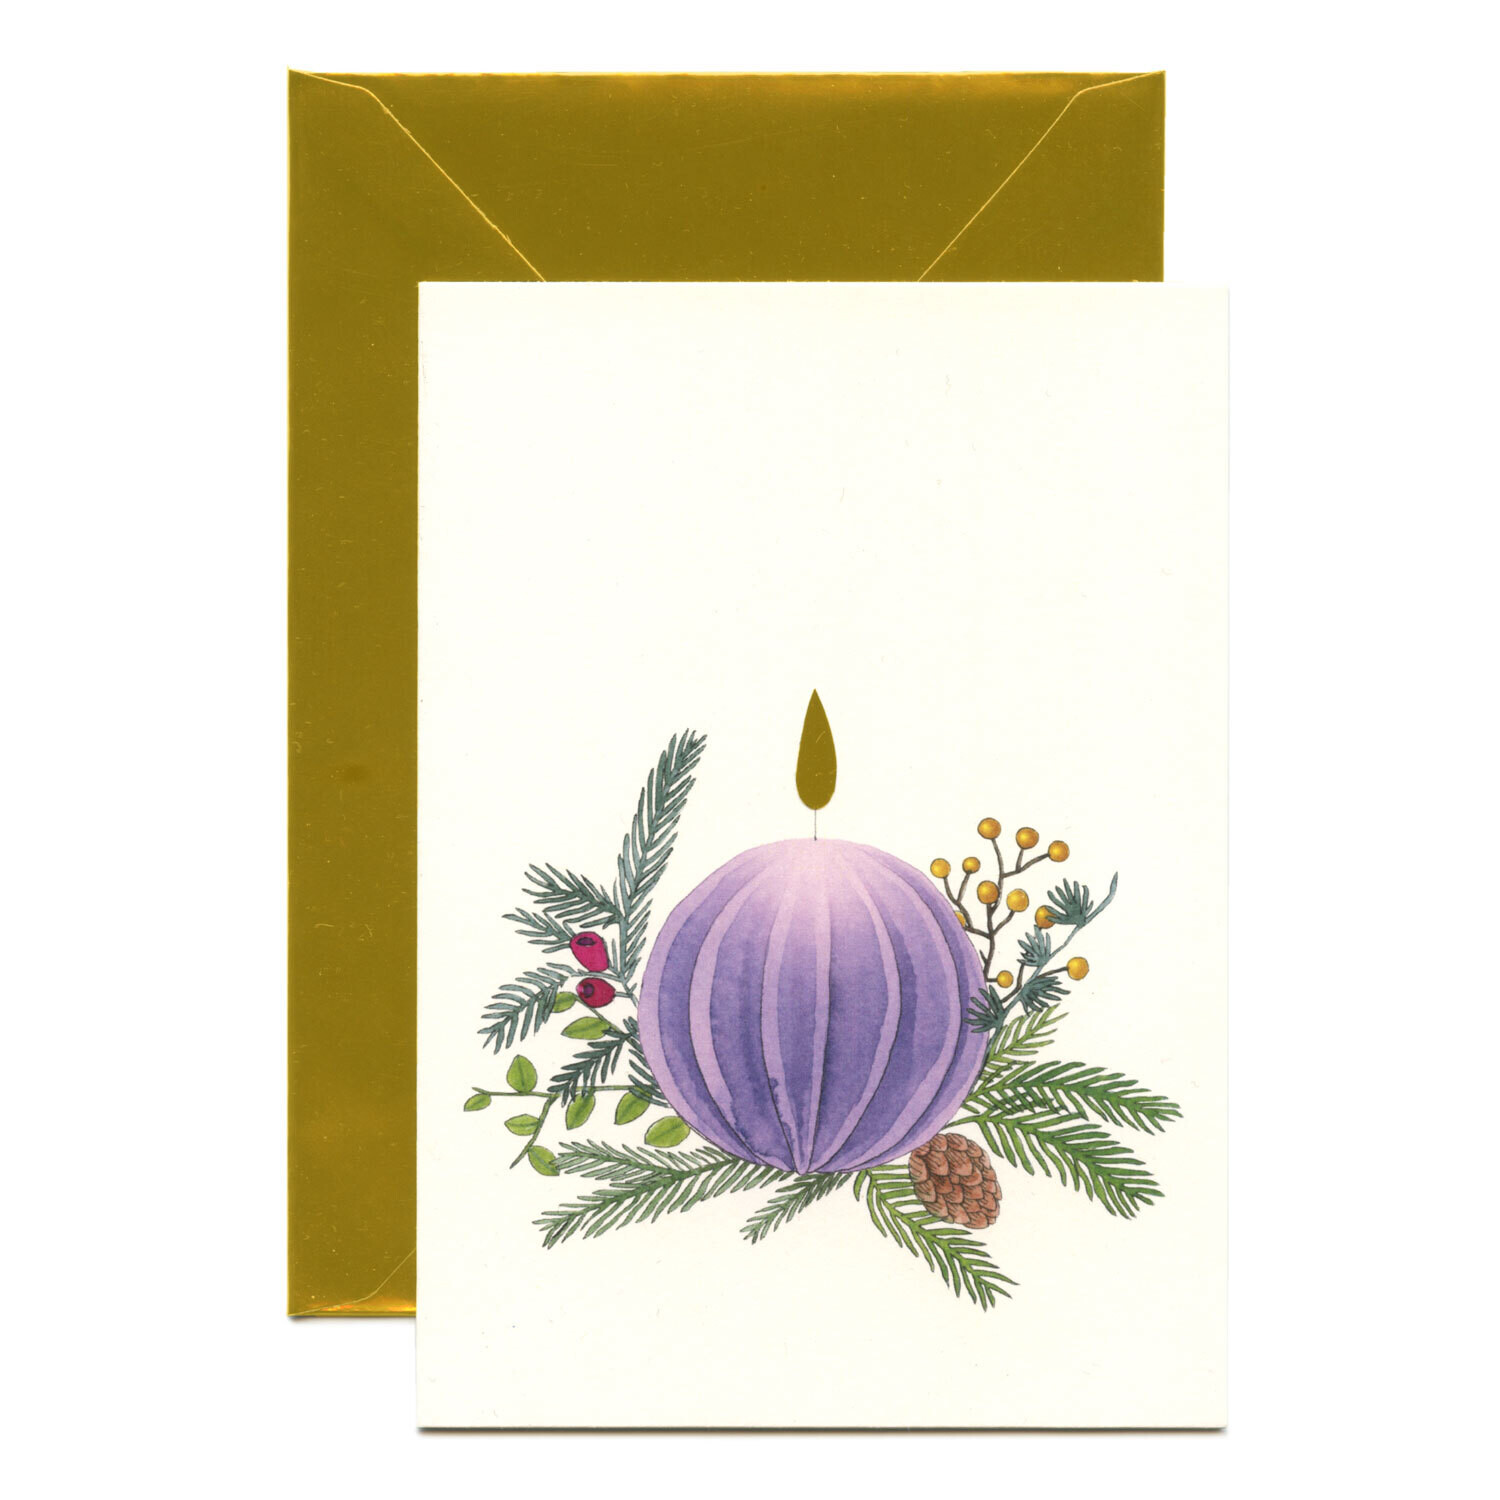 Festive Candle Greeting Card